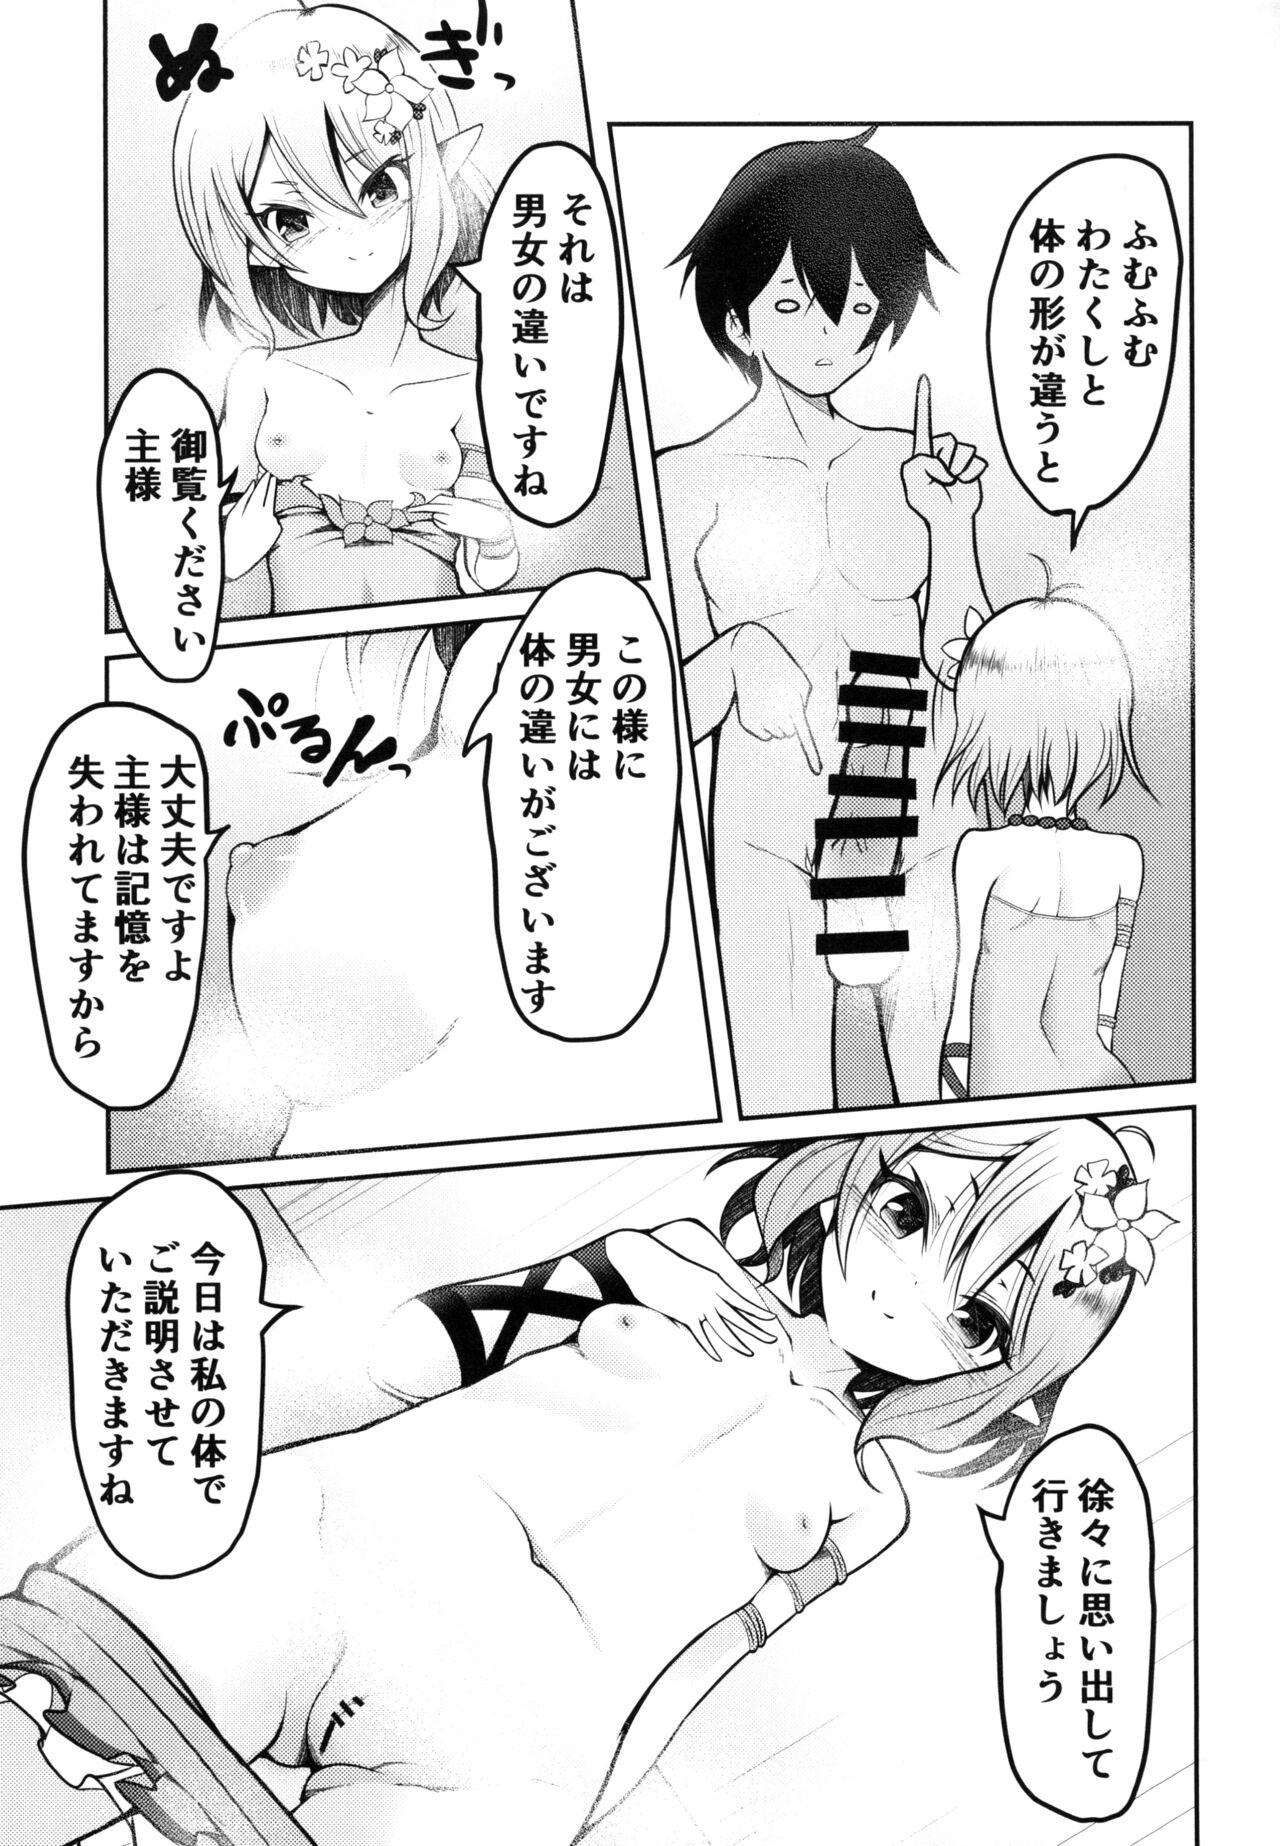 Master おべんきょしましょう主様!! - Princess connect Stripping - Page 5